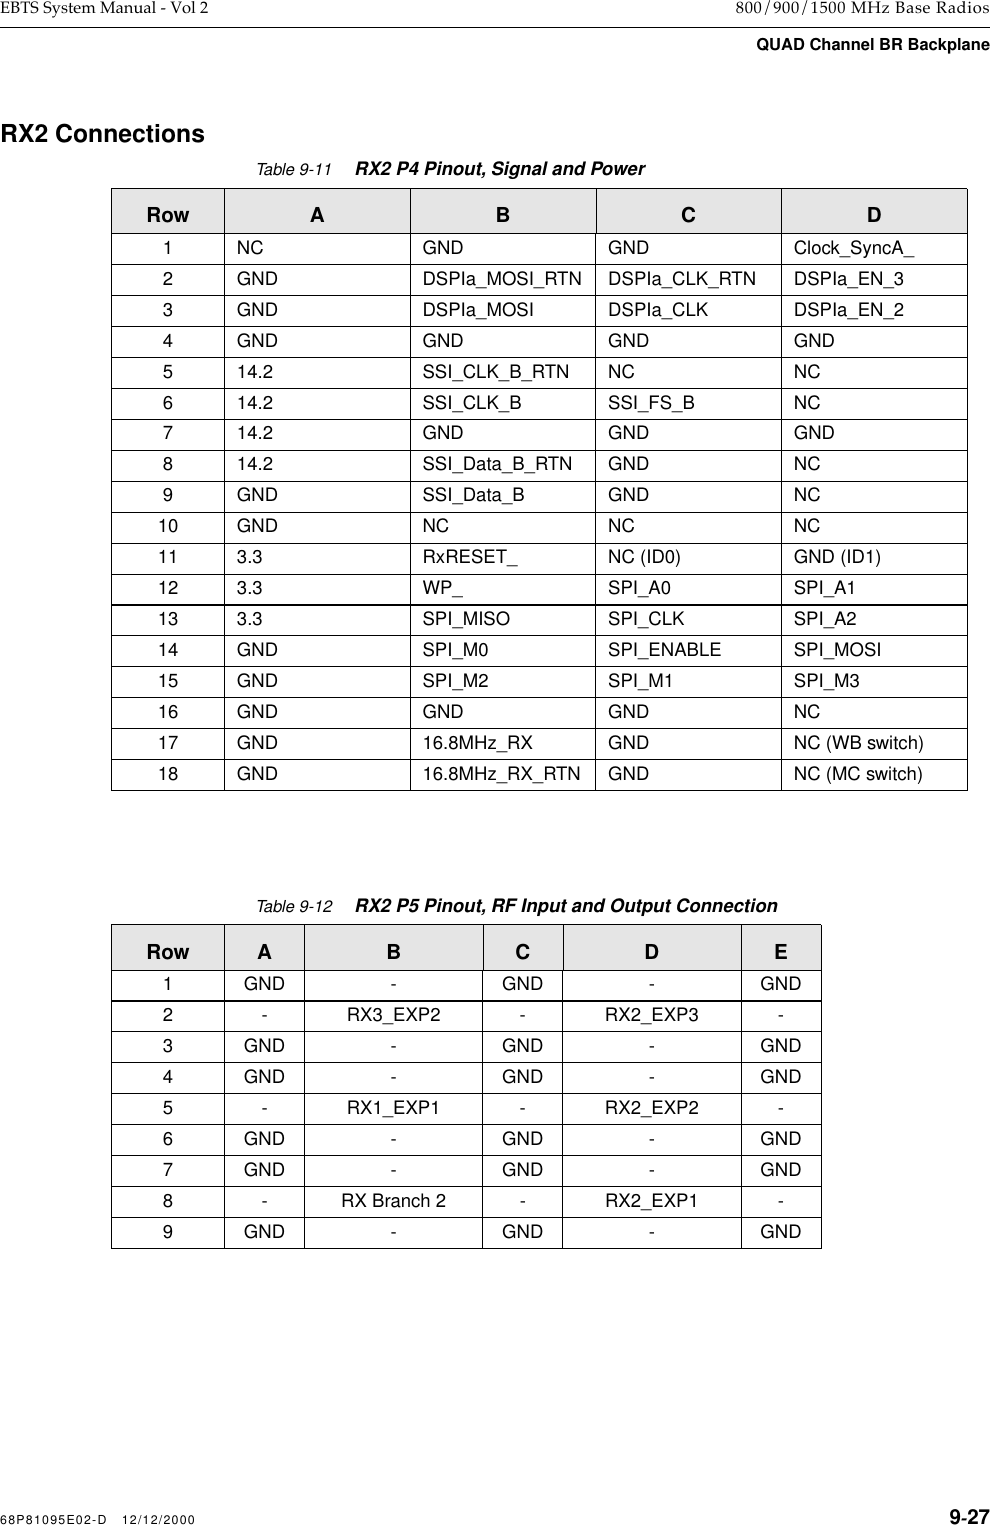 68P81095E02-D   12/12/2000 9-27EBTS System Manual - Vol 2 800/900/1500 MHz Base RadiosQUAD Channel BR BackplaneRX2 ConnectionsTable 9-11RX2 P4 Pinout, Signal and PowerRow A B C D1 NC GND GND Clock_SyncA_2 GND DSPIa_MOSI_RTN DSPIa_CLK_RTN DSPIa_EN_33 GND DSPIa_MOSI DSPIa_CLK DSPIa_EN_24 GND GND GND GND5 14.2 SSI_CLK_B_RTN NC NC6 14.2 SSI_CLK_B SSI_FS_B NC7 14.2 GND GND GND8 14.2 SSI_Data_B_RTN GND NC9 GND SSI_Data_B GND NC10 GND NC NC NC11 3.3 RxRESET_ NC (ID0) GND (ID1)12 3.3 WP_ SPI_A0 SPI_A113 3.3 SPI_MISO SPI_CLK SPI_A214 GND SPI_M0 SPI_ENABLE SPI_MOSI15 GND SPI_M2 SPI_M1 SPI_M316 GND GND GND NC17 GND 16.8MHz_RX GND NC (WB switch)18 GND 16.8MHz_RX_RTN GND NC (MC switch)Table 9-12RX2 P5 Pinout, RF Input and Output ConnectionRow A B C D E1 GND - GND - GND2 - RX3_EXP2 - RX2_EXP3 -3 GND - GND - GND4 GND - GND - GND5 - RX1_EXP1 - RX2_EXP2 -6 GND - GND - GND7 GND - GND - GND8 - RX Branch 2 - RX2_EXP1 -9 GND - GND - GND